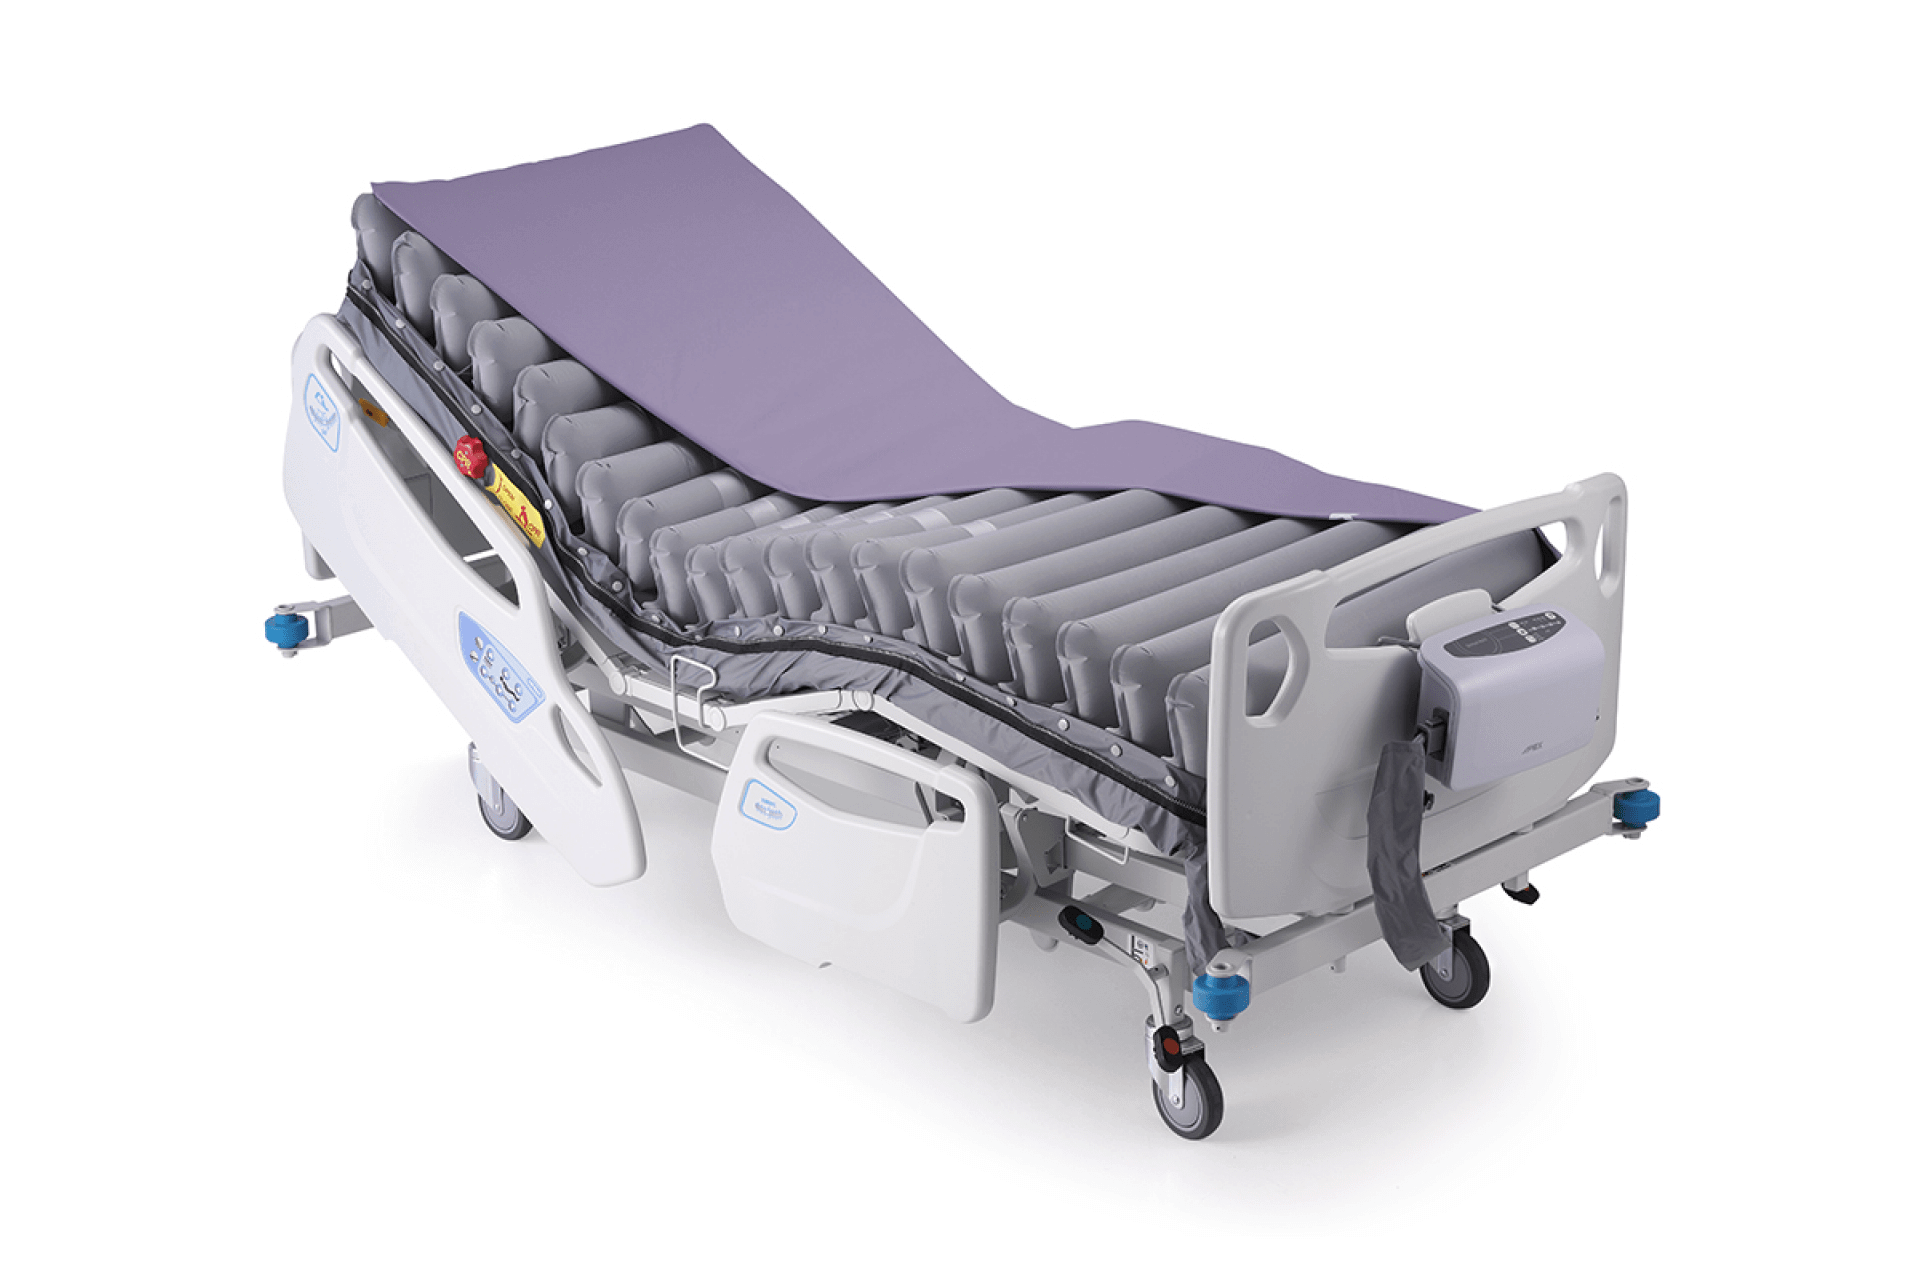 Domus Auto - Support Surfaces - Pressure Area care | US Wellell